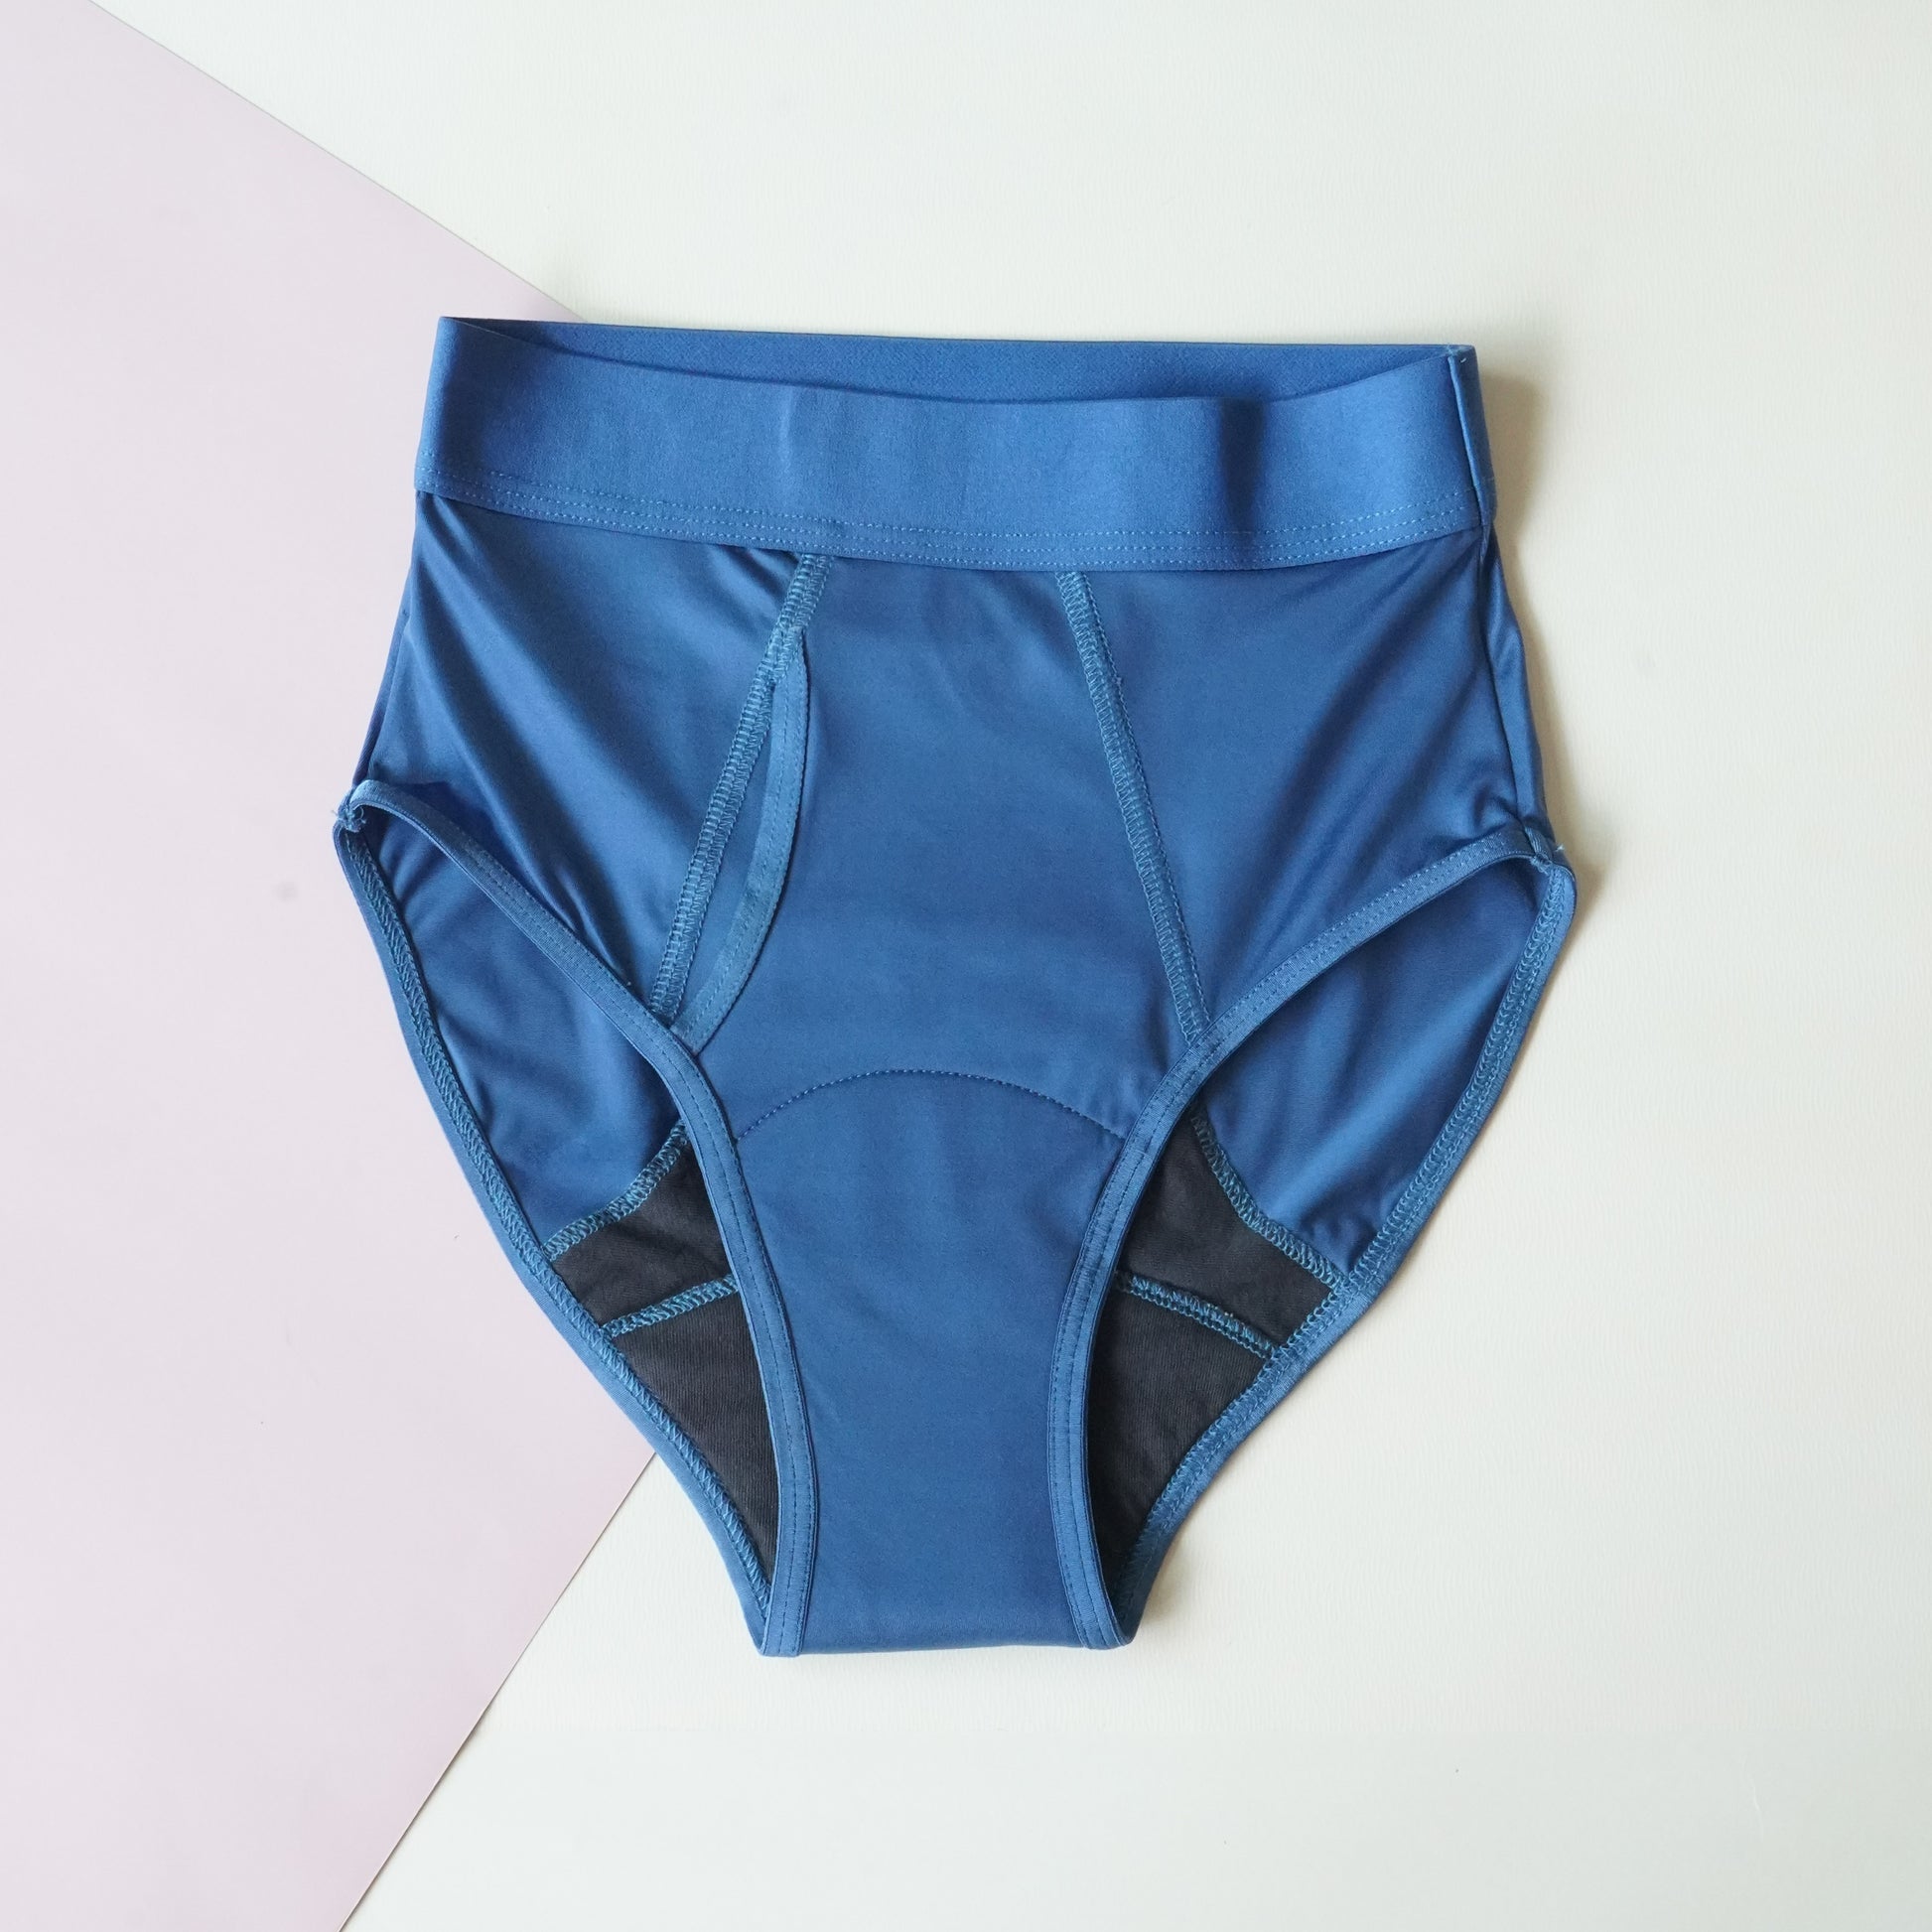 Proof Period & Leak Proof High-Waist Brief - Moderate Absorbency